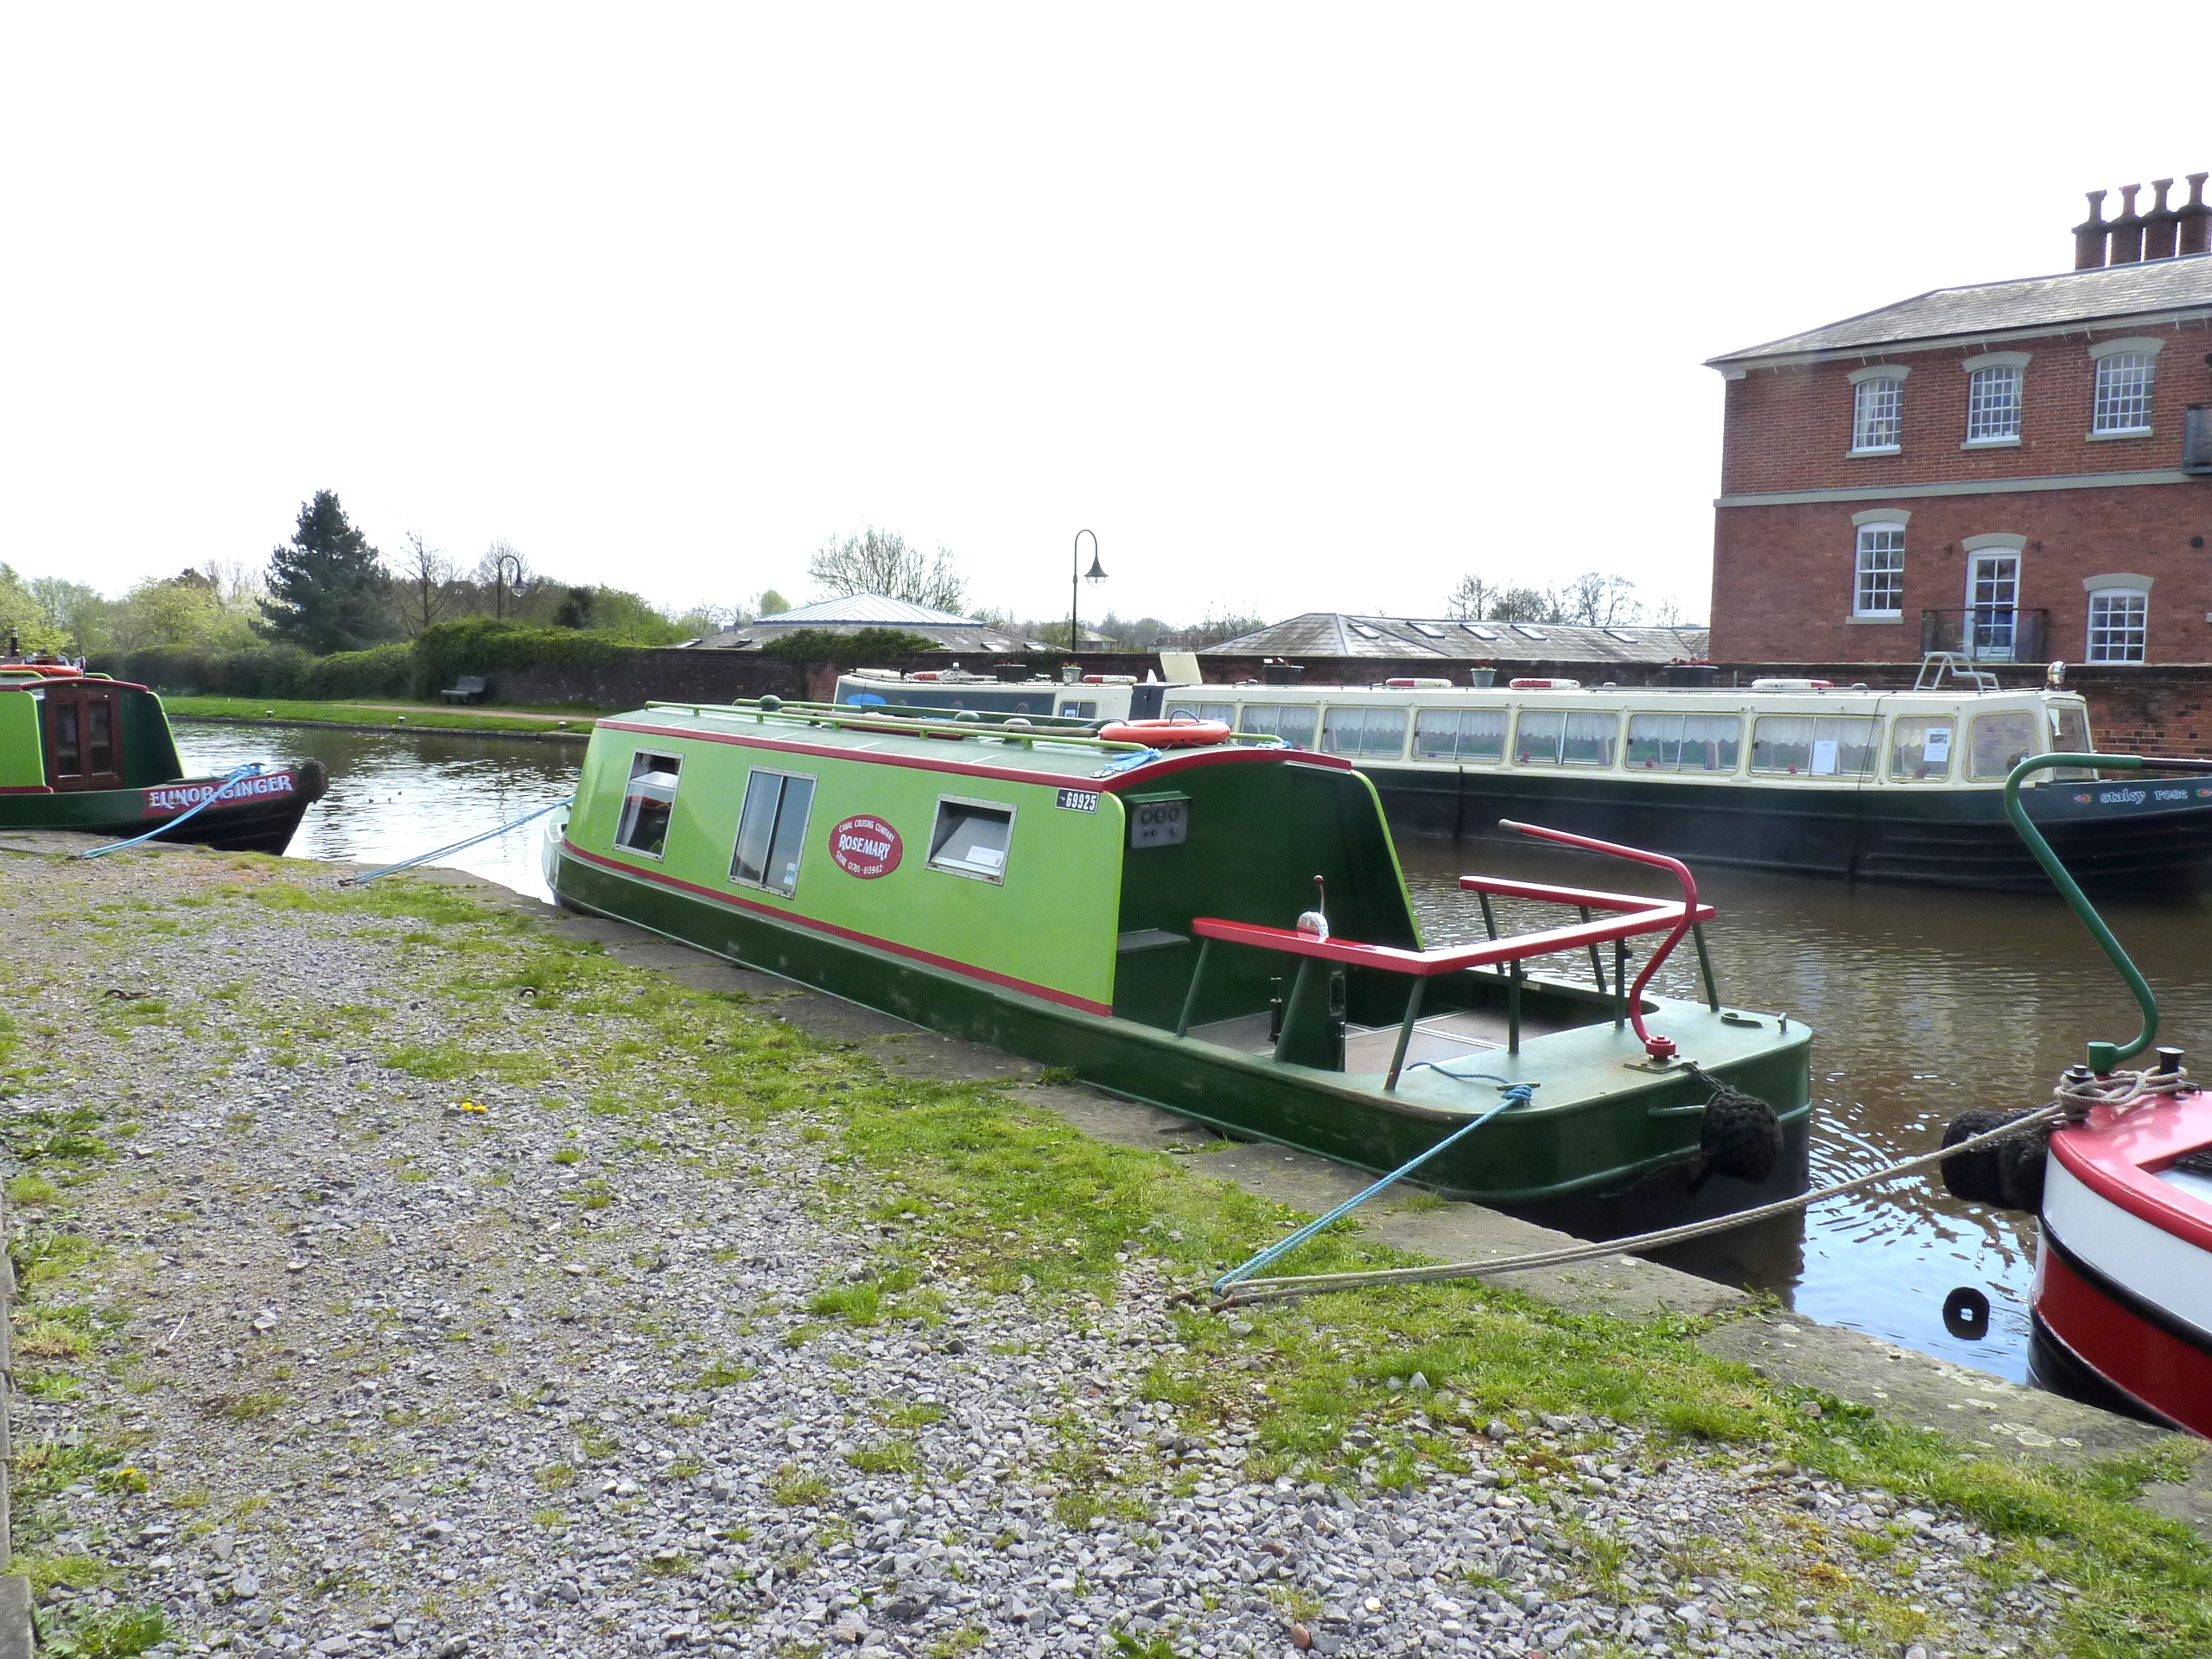 The Classic3 class canal boat